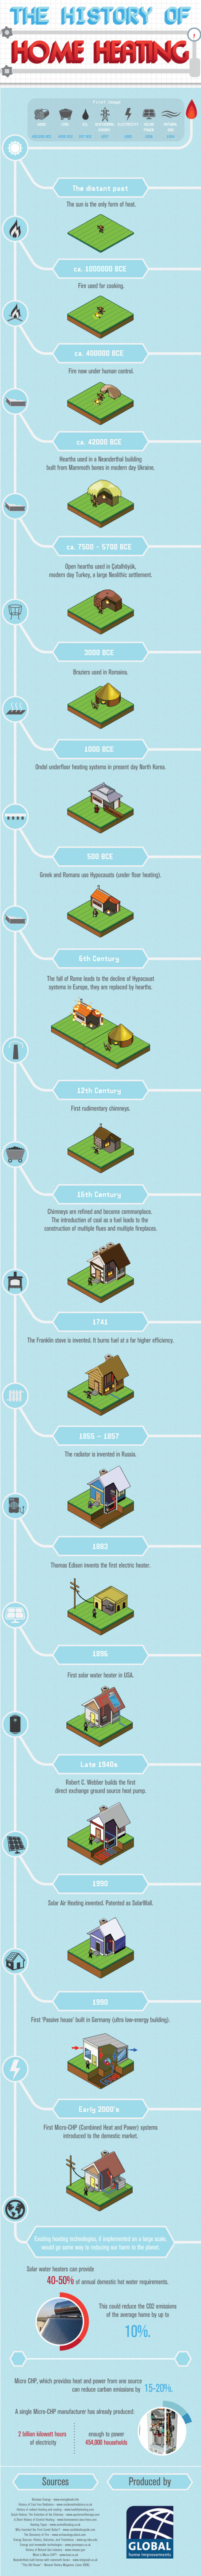 The History of Home Heating infographic